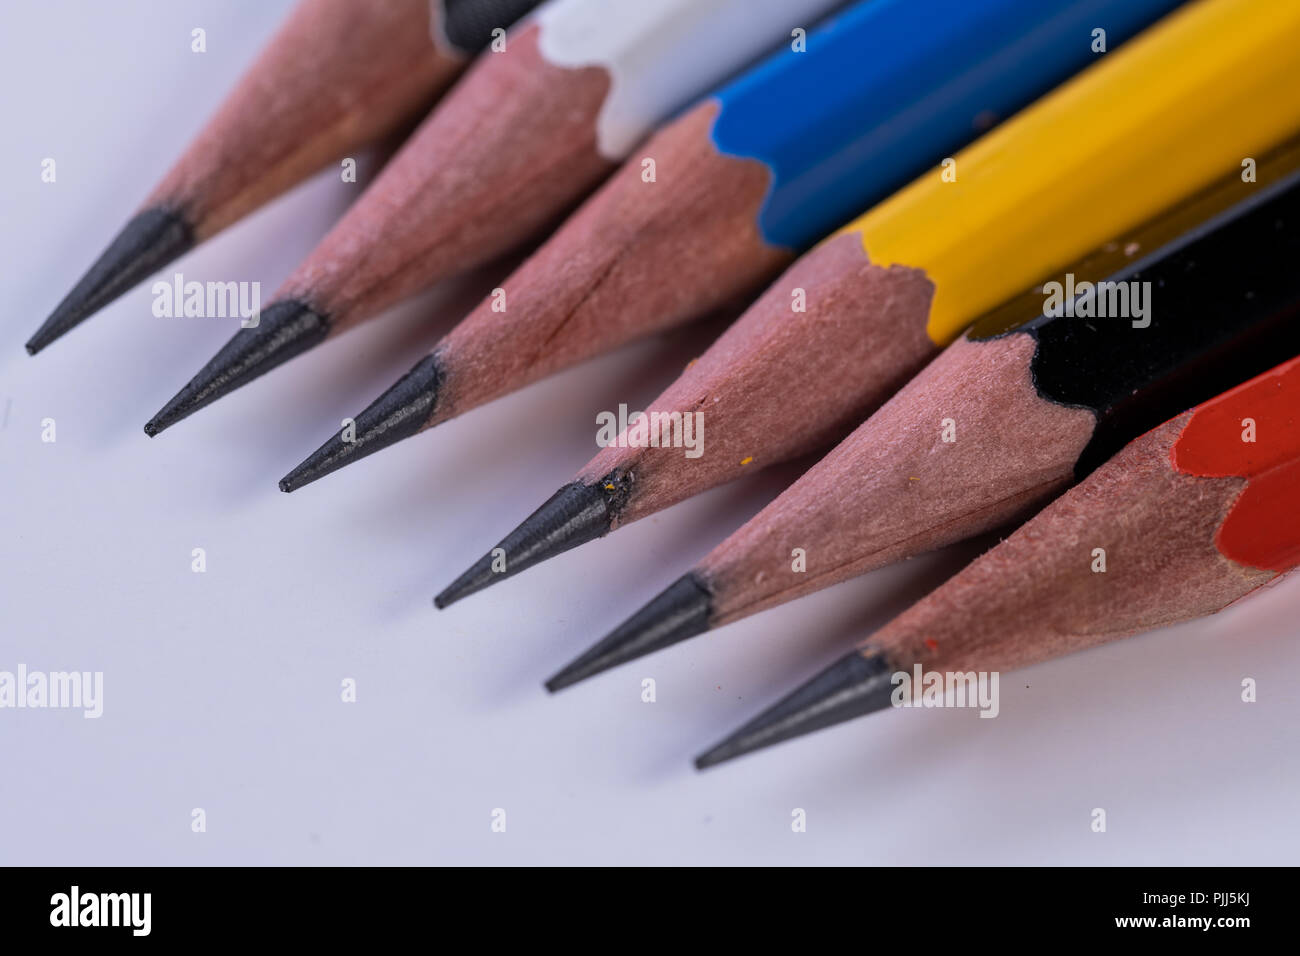 Several sharp new lead graphite pencils of various colors and patterns Stock Photo